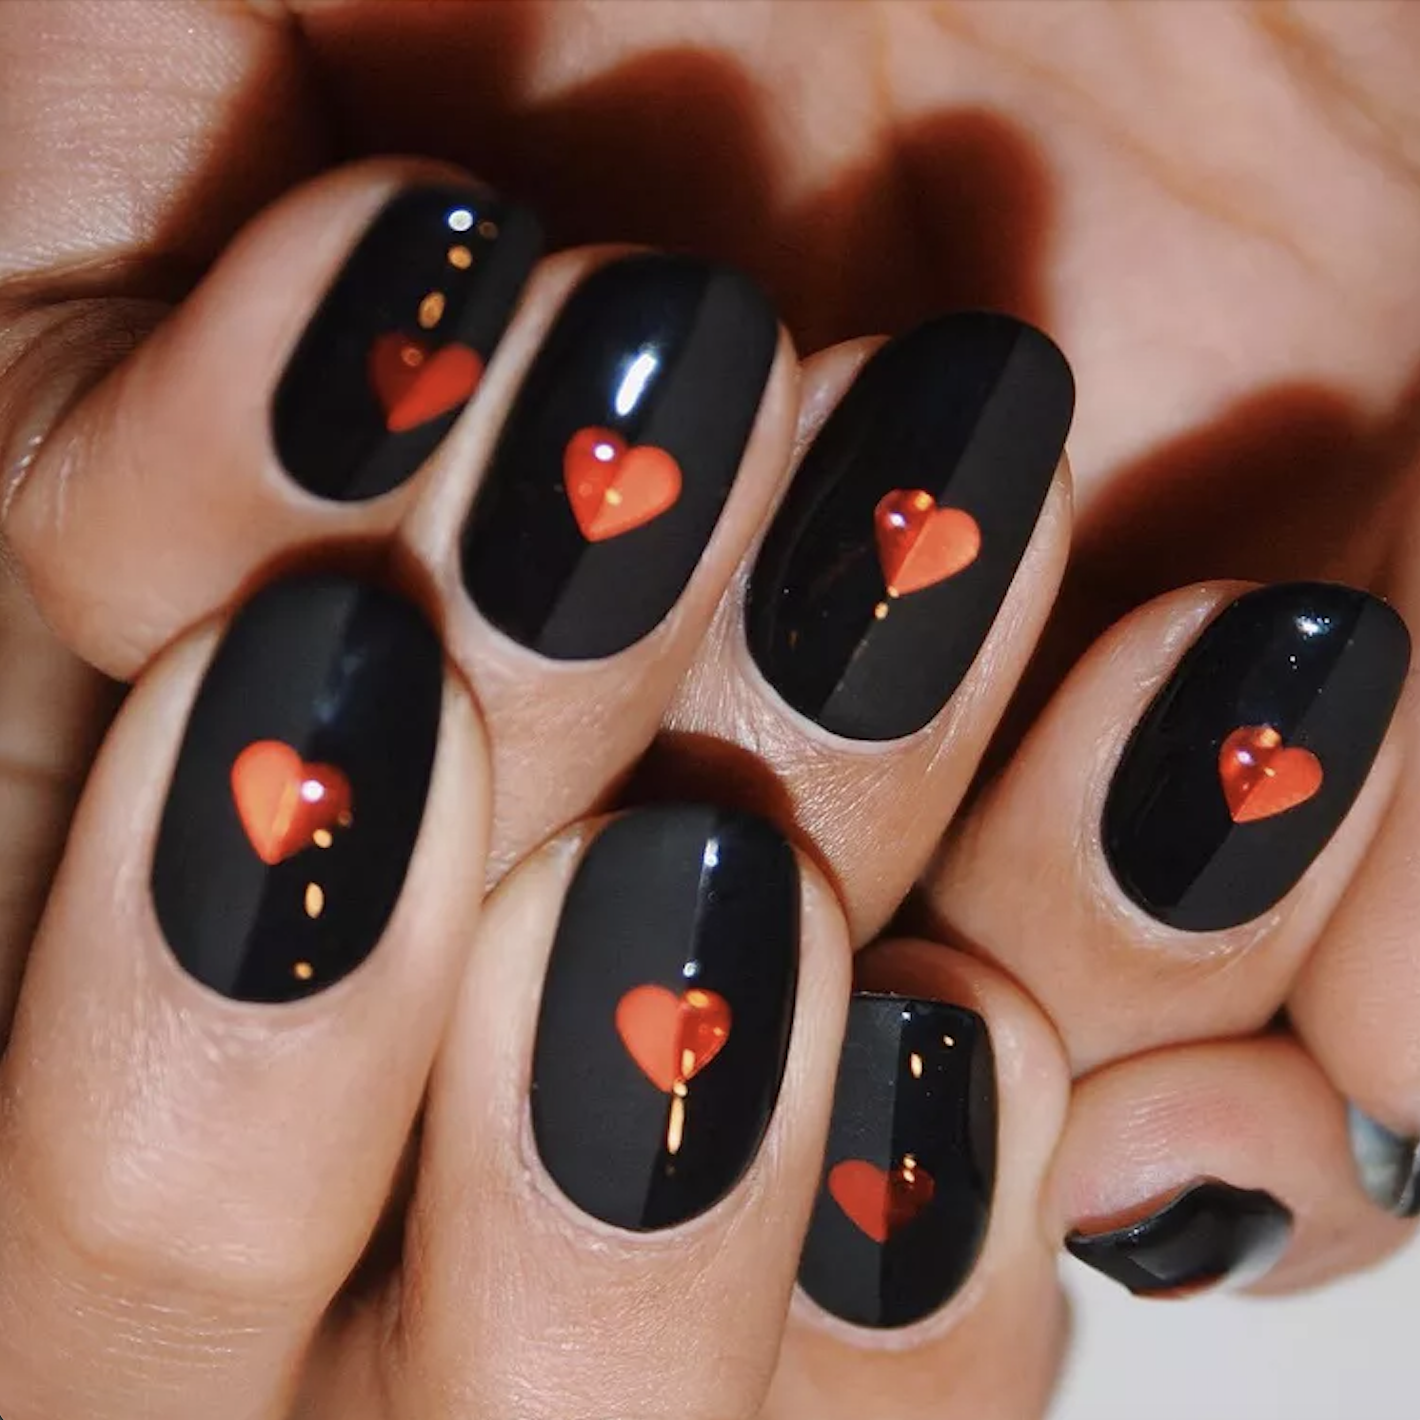 Gothic manicure for Valentine's Day: 10 unconventional ideas for those who do not celebrate February 14